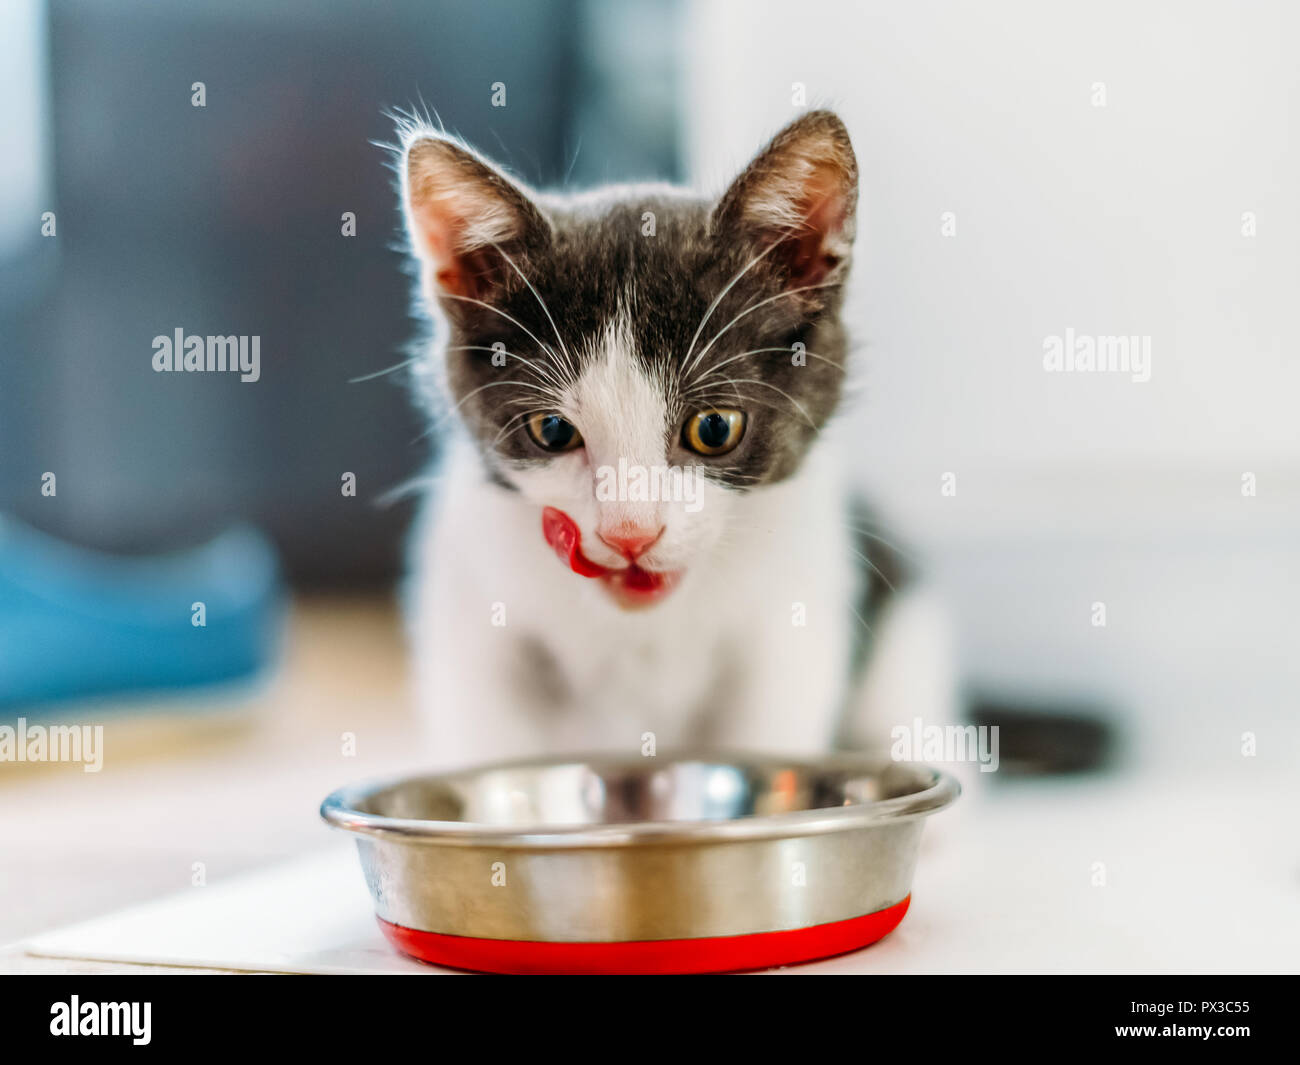 Hungry Cute Baby Cat Eating Stock Photo